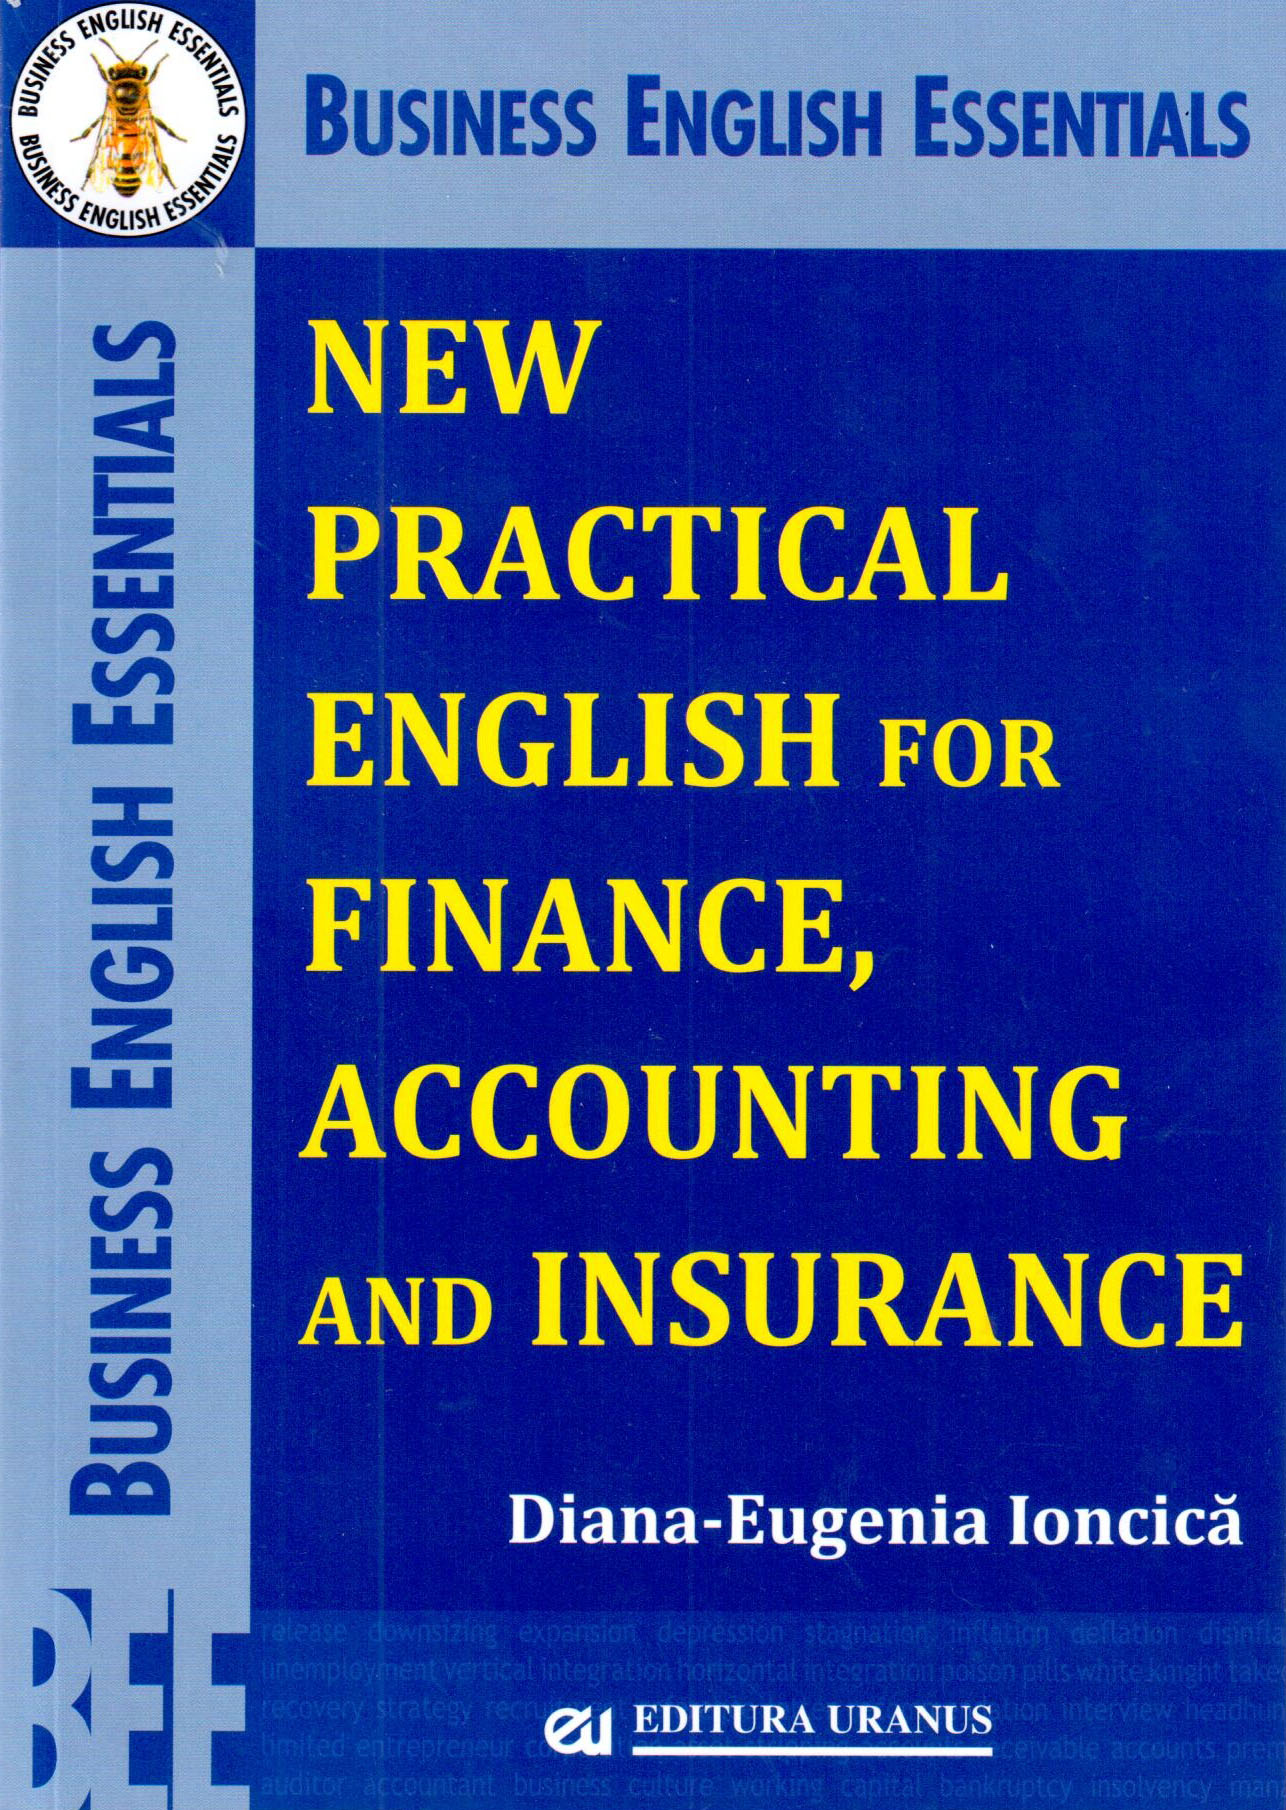 New Practical English for, Finance, Accounting and Insurance | Diana-Eugenia Ioncica